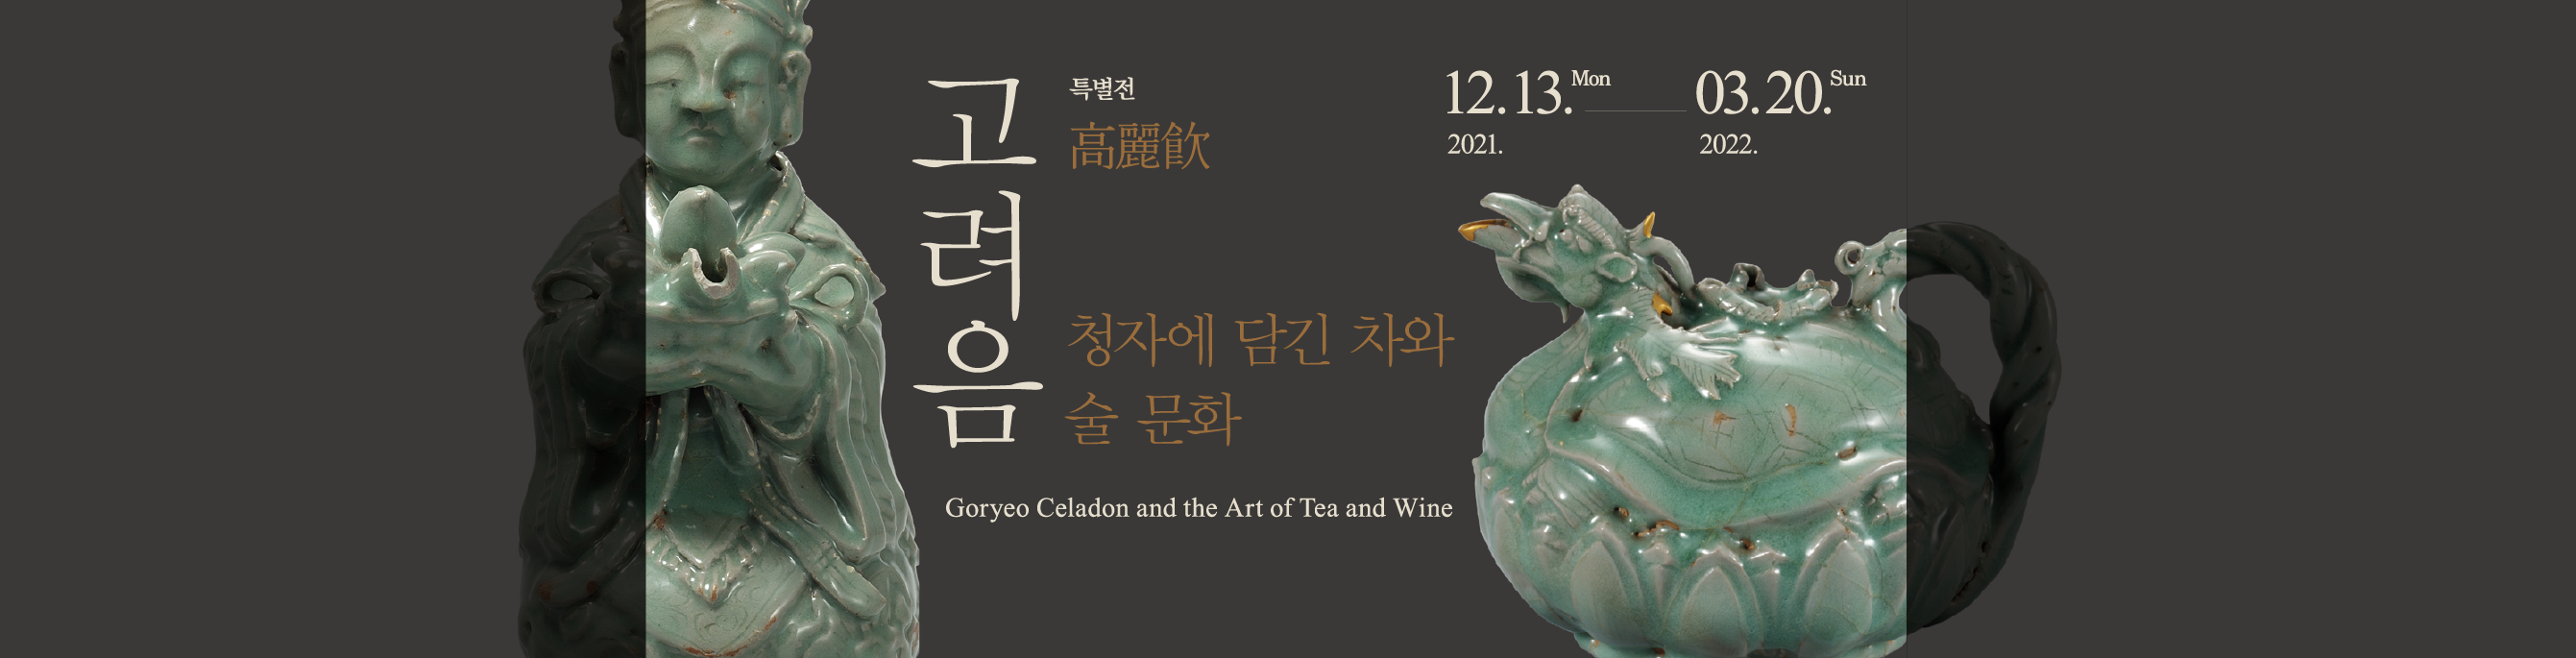 Goryeo Celadon and the Art of Tea and Wine